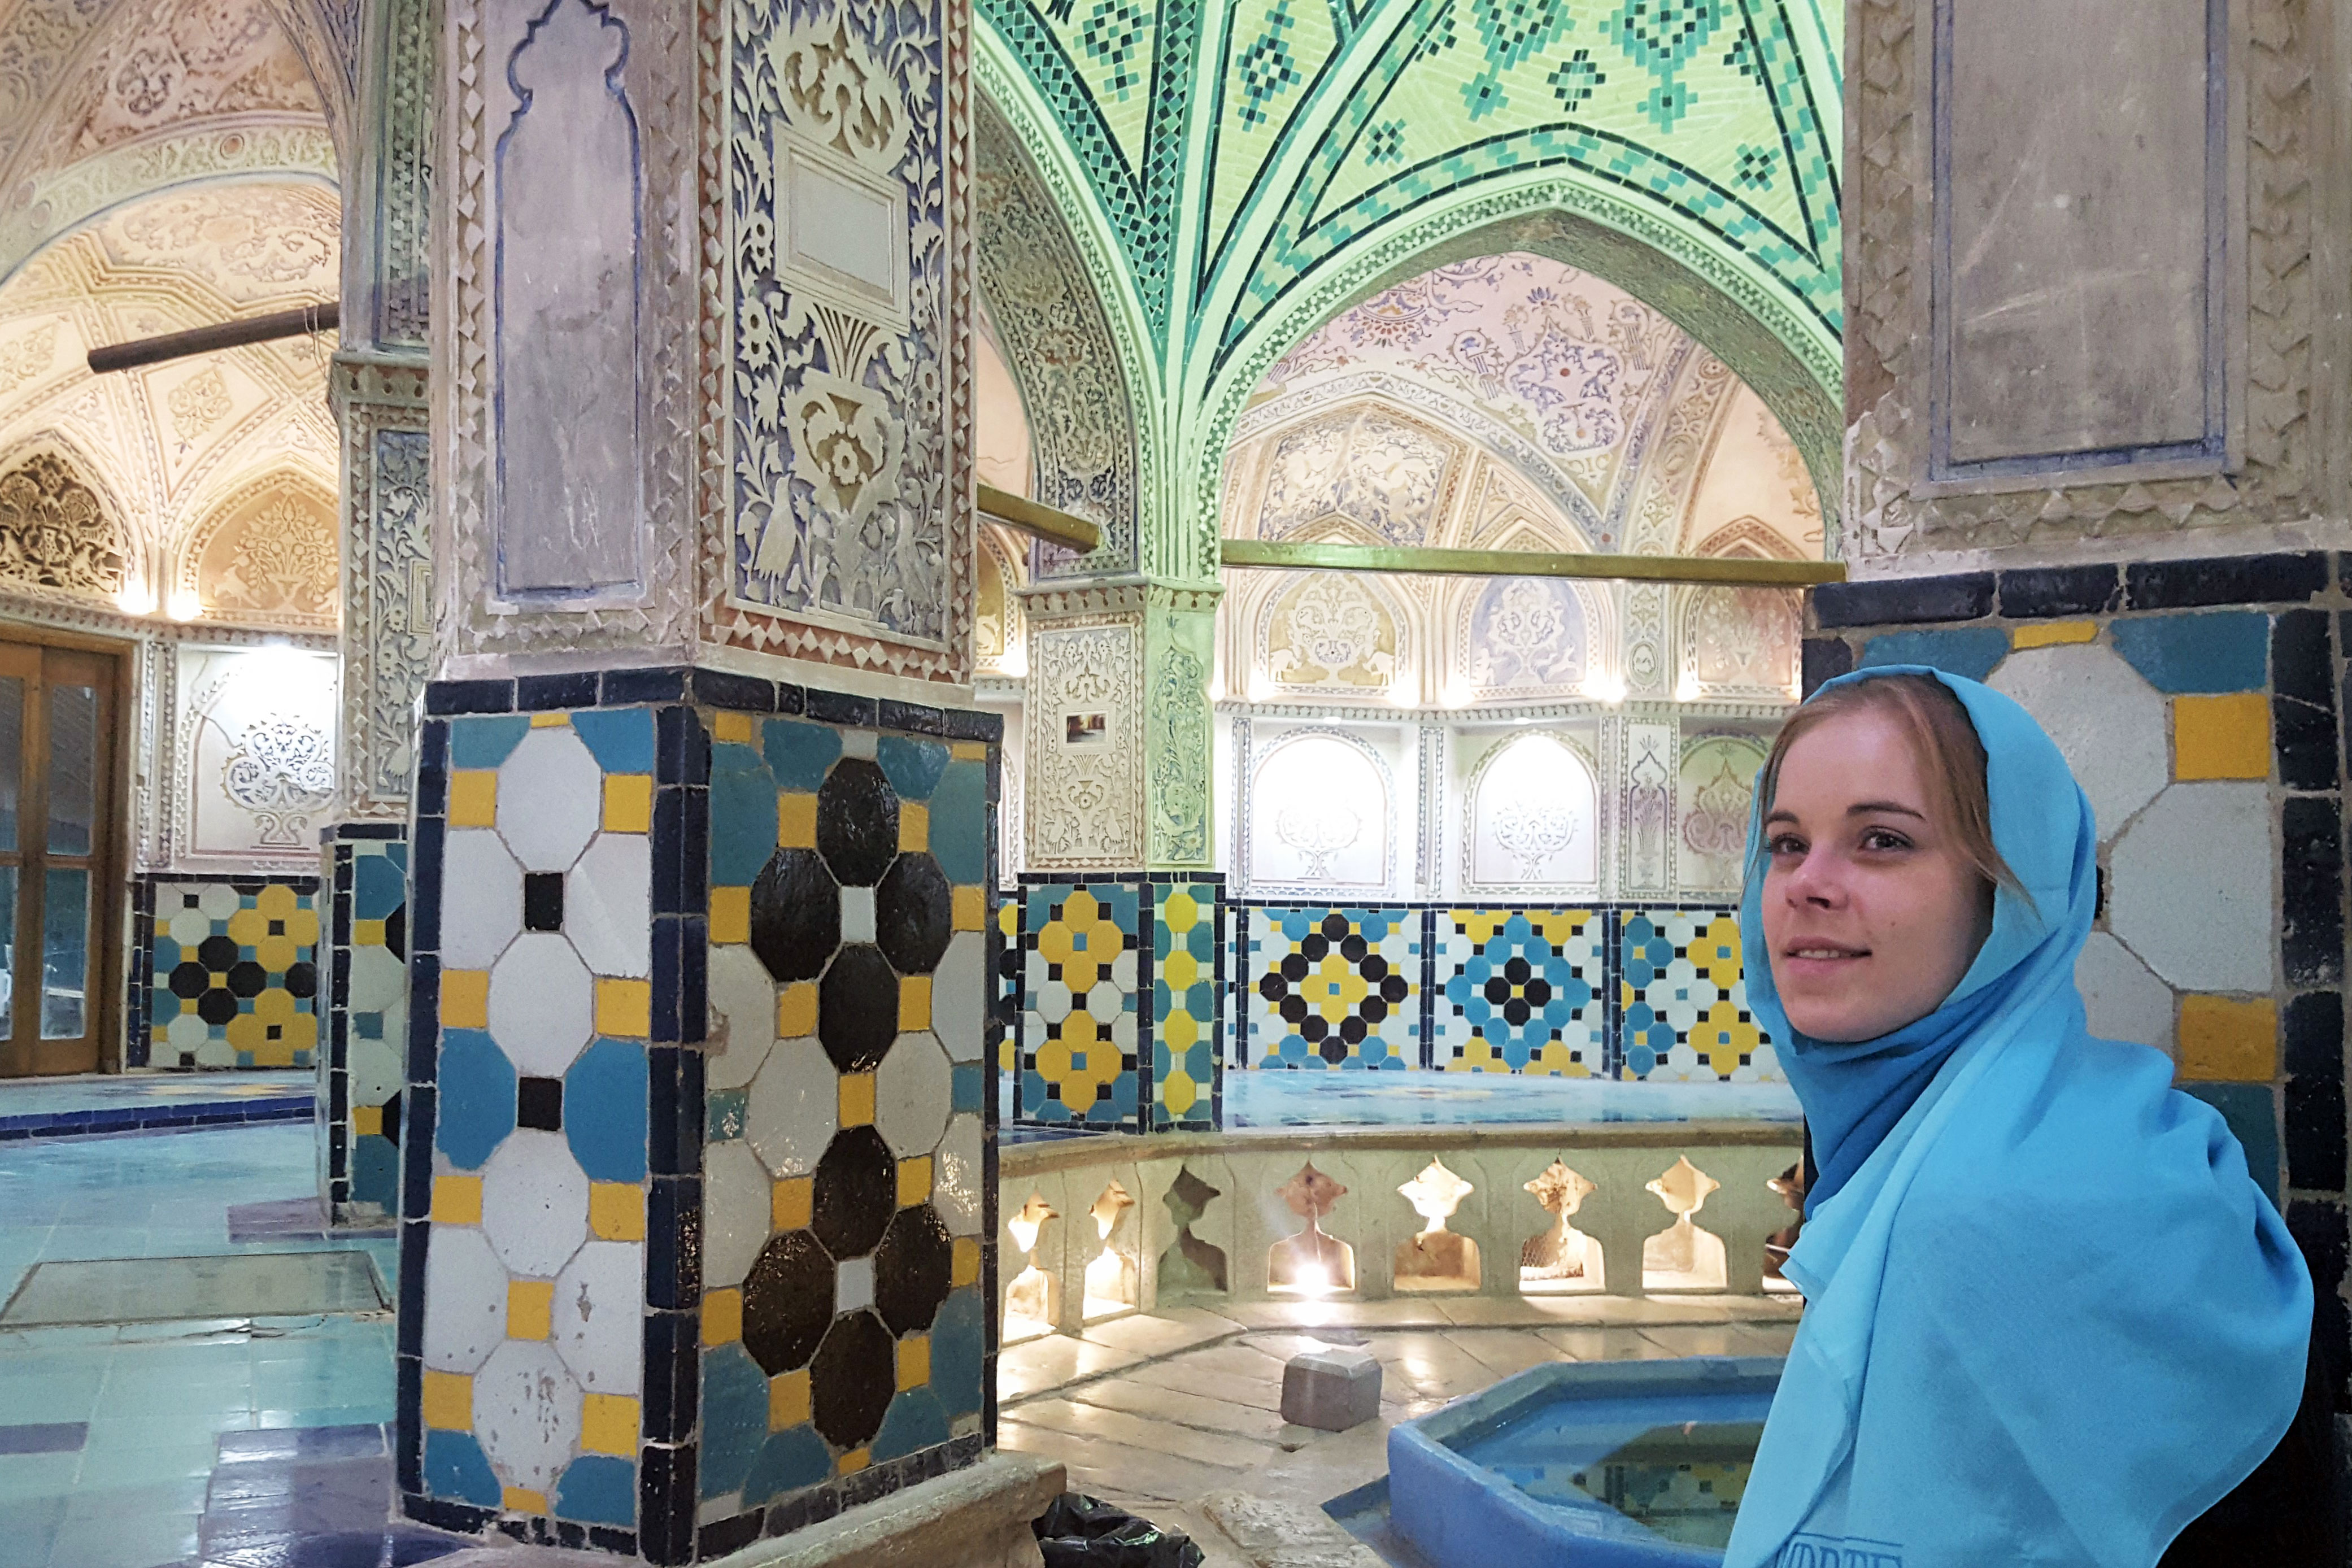 On a trip to Iran: preparing for a culture shock